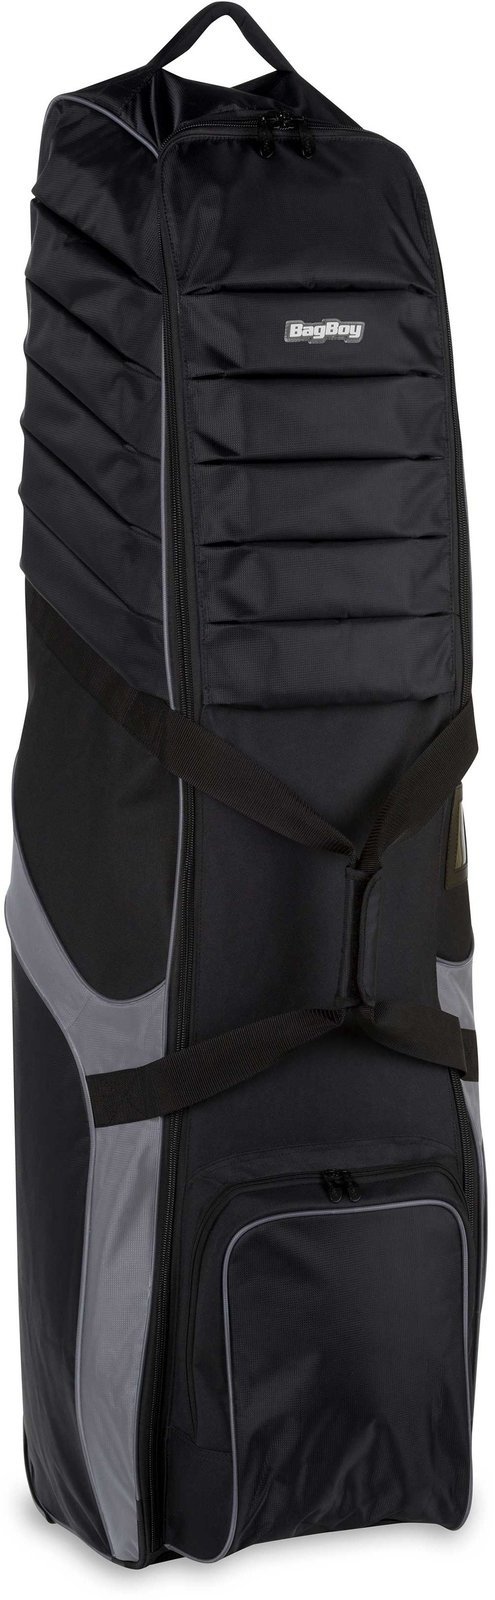 Travel Bag BagBoy T-750 Travel Cover Black/Charcoal